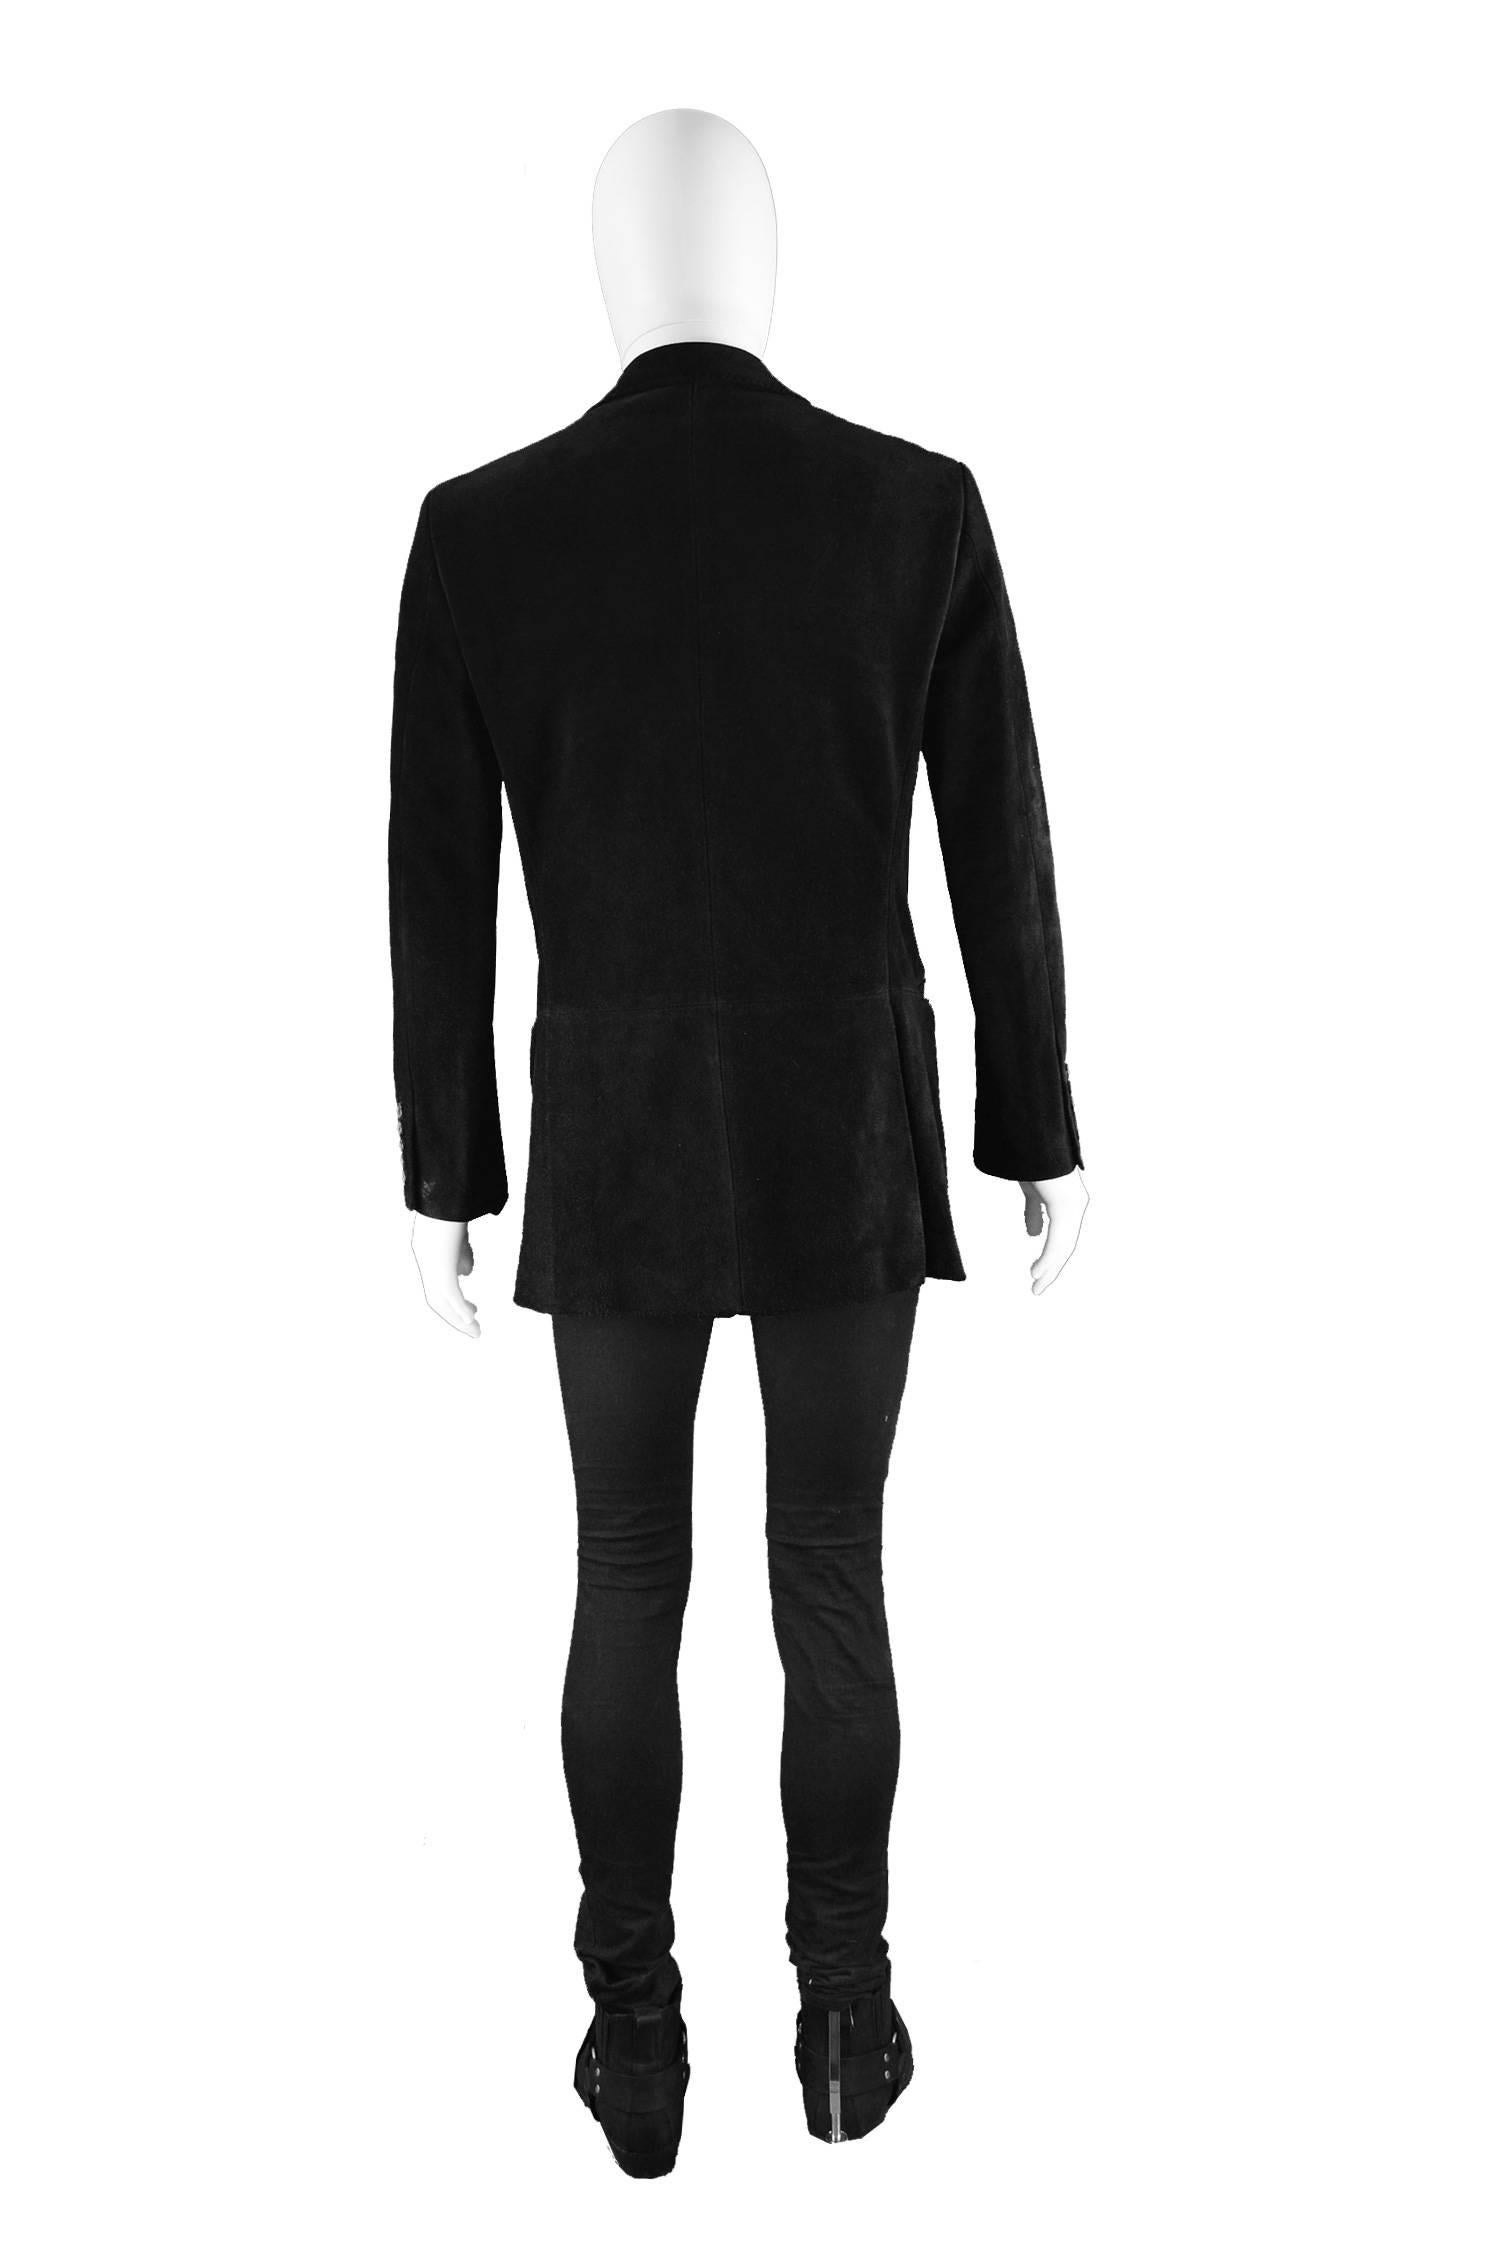 Tom Ford for Gucci Men's Black Suede Blazer with Peaked Lapels, A/W 2002 2